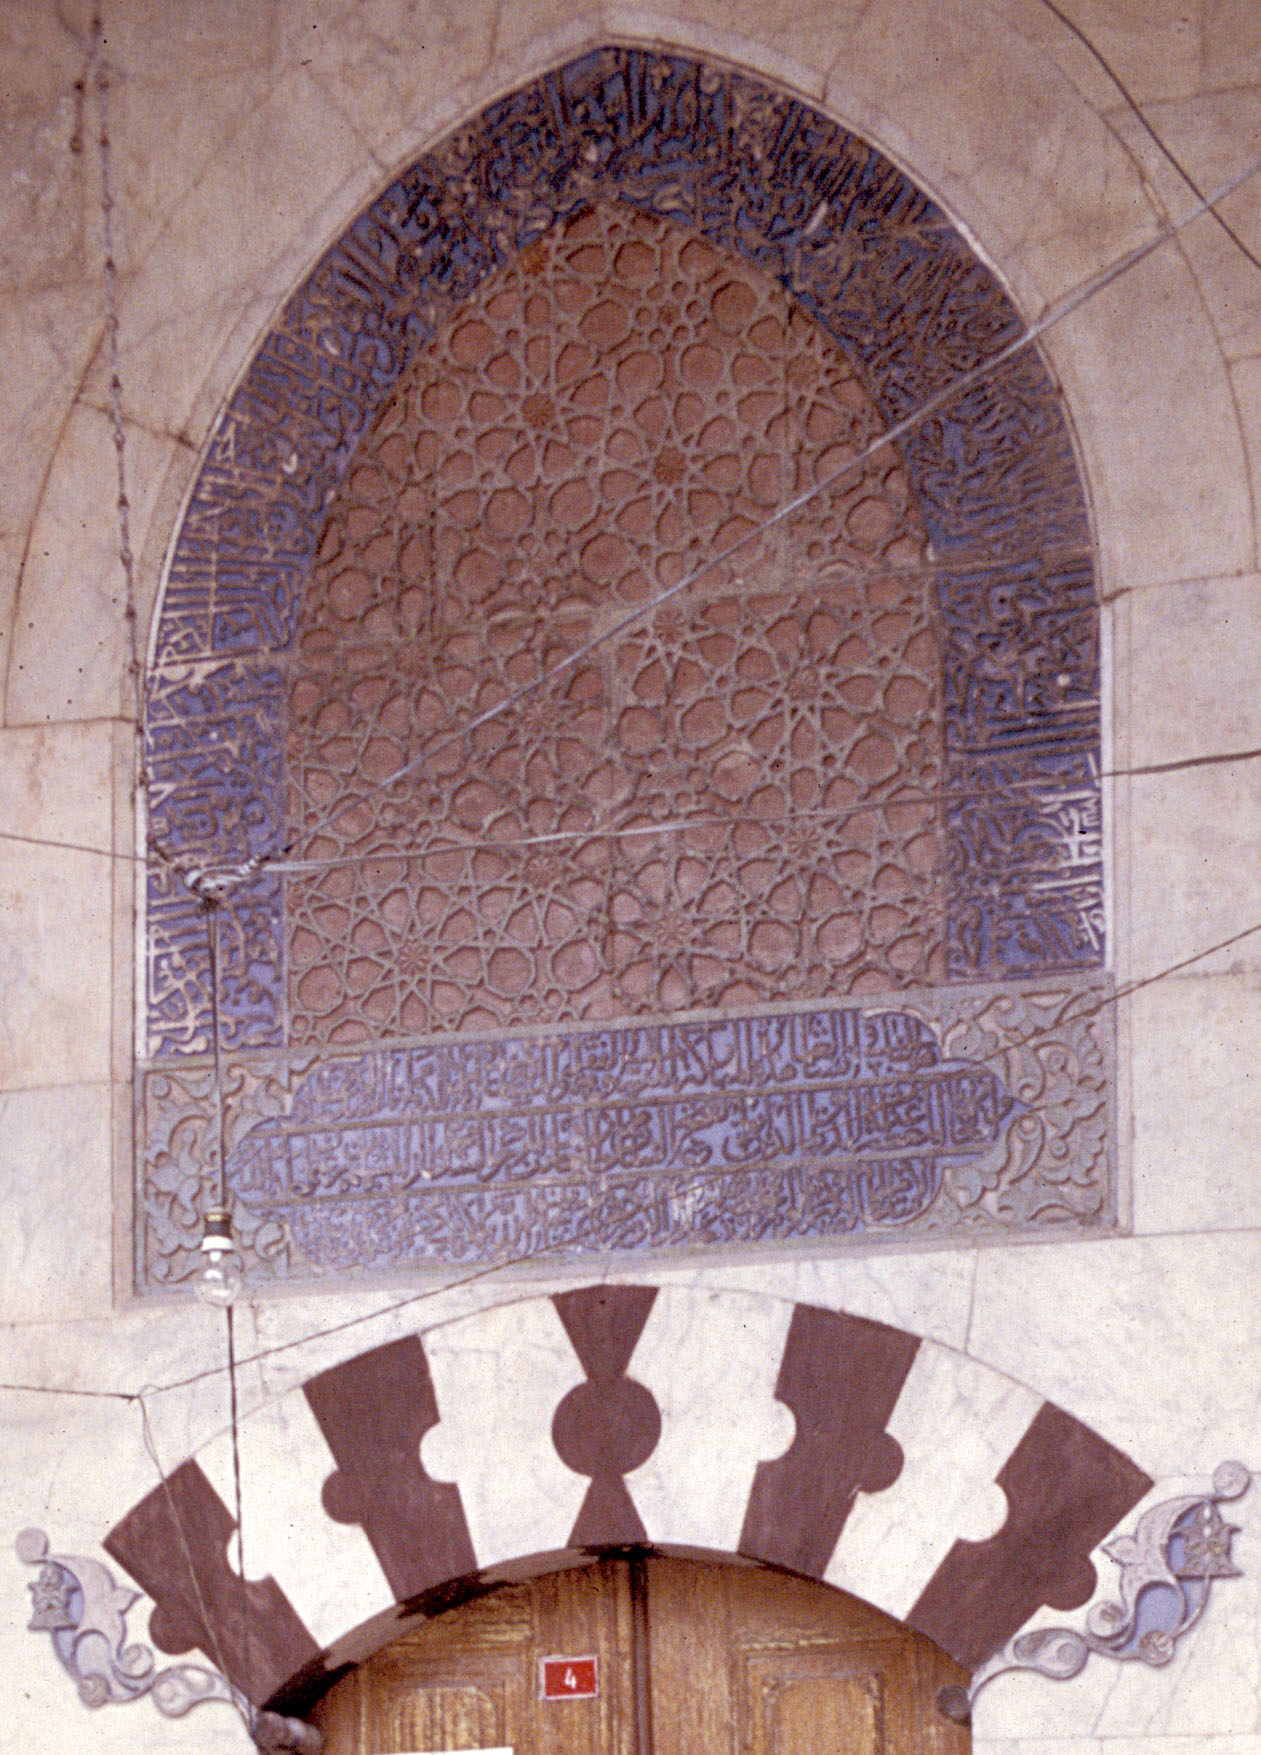 Detail from mosque portal showing interlocked stars decorating tympanum, bordered by carved inscriptions.  The red and white voussoirs of the entry arch, seen below, are cut into unique shapes